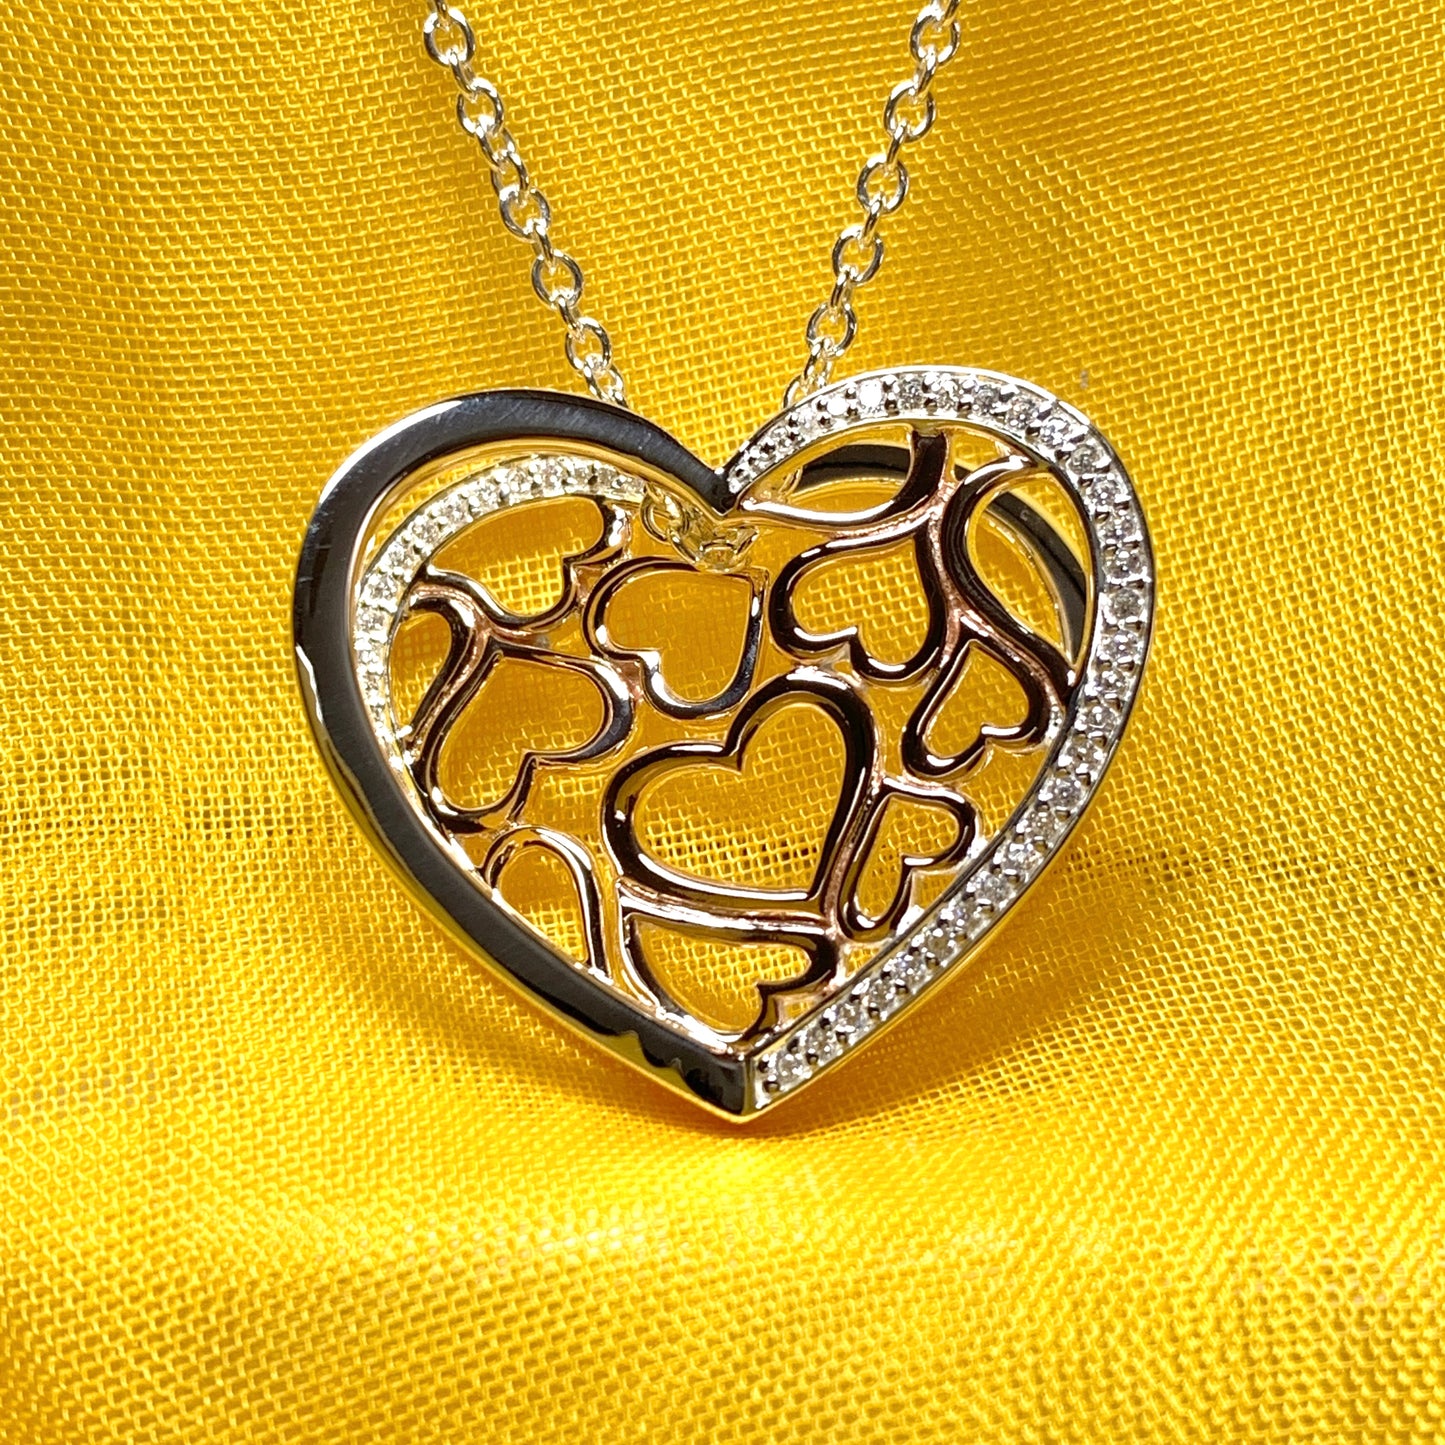 Heart shaped necklace sterling silver with rose gold gilt